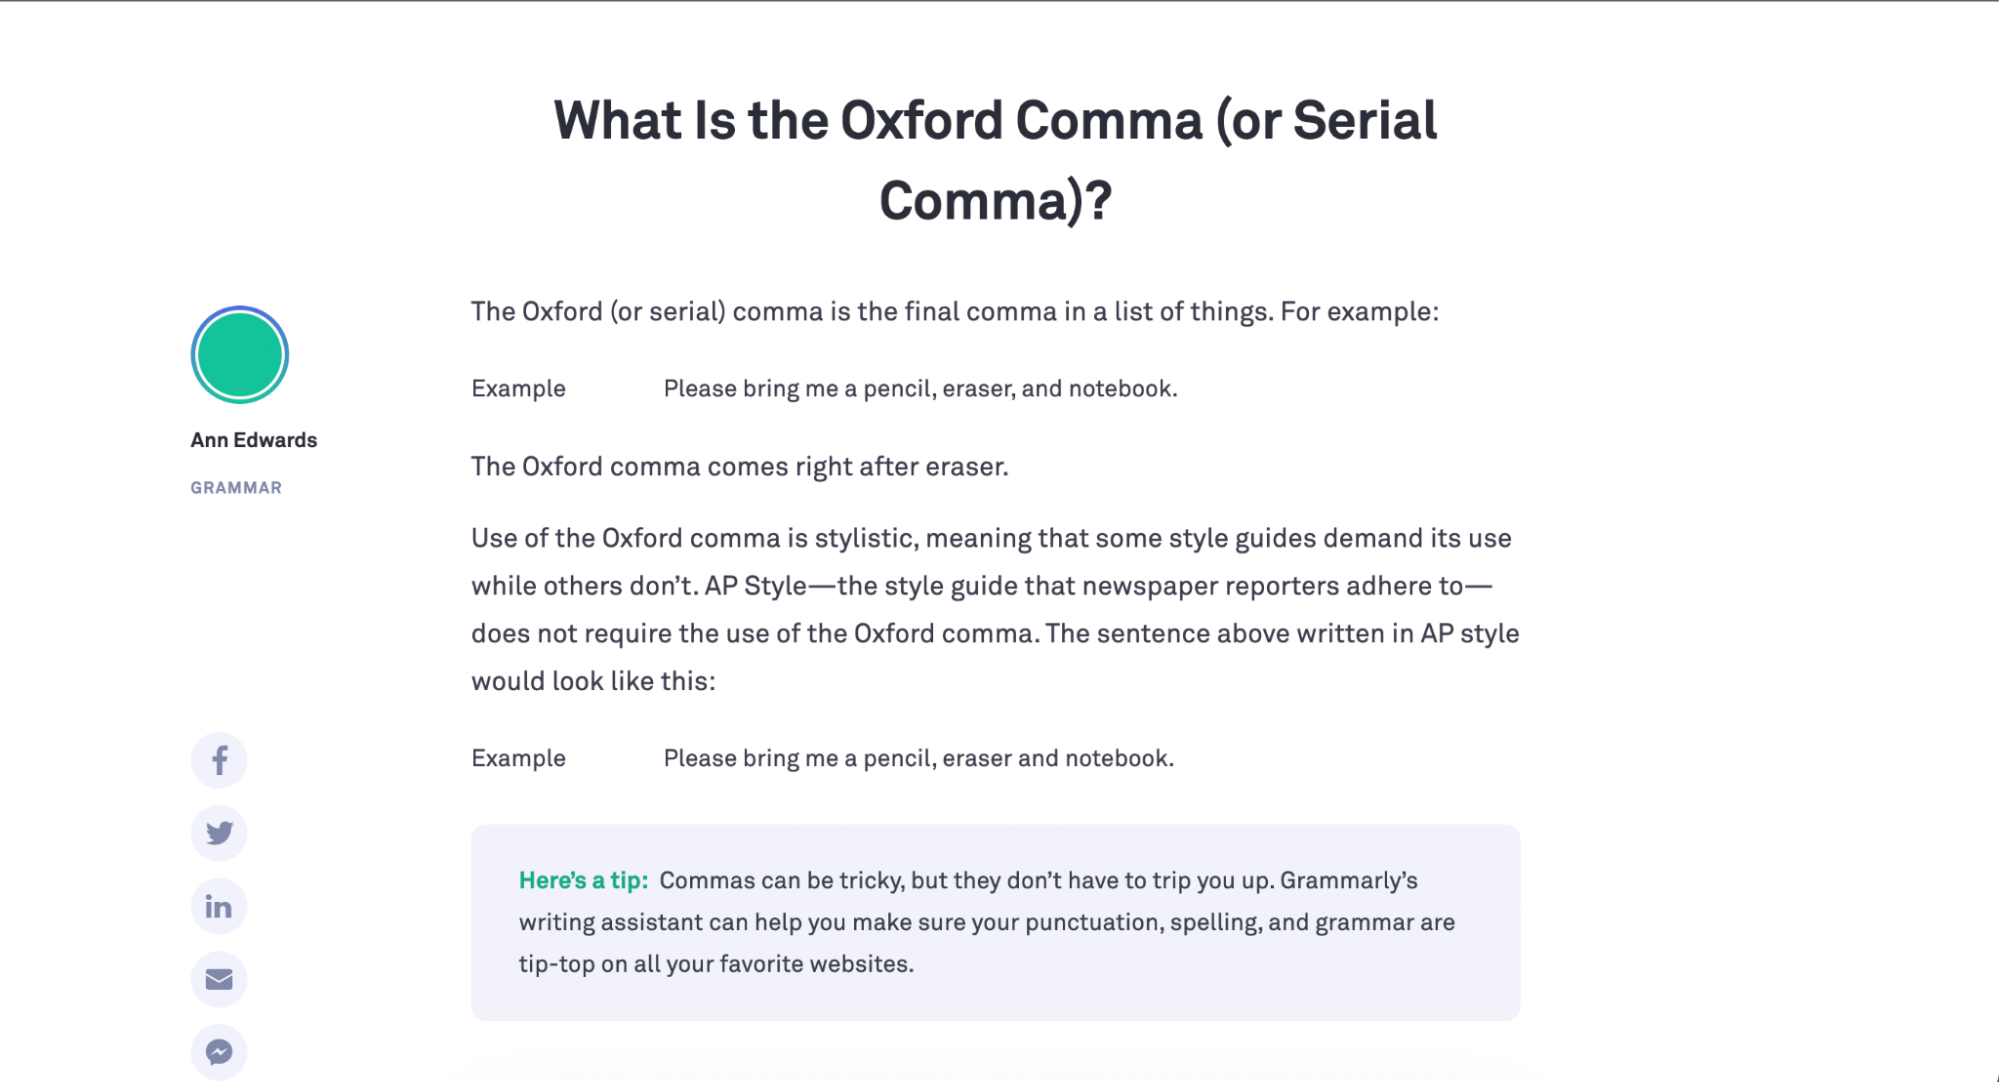 What is the Oxford Comma (or Serial Comma)?